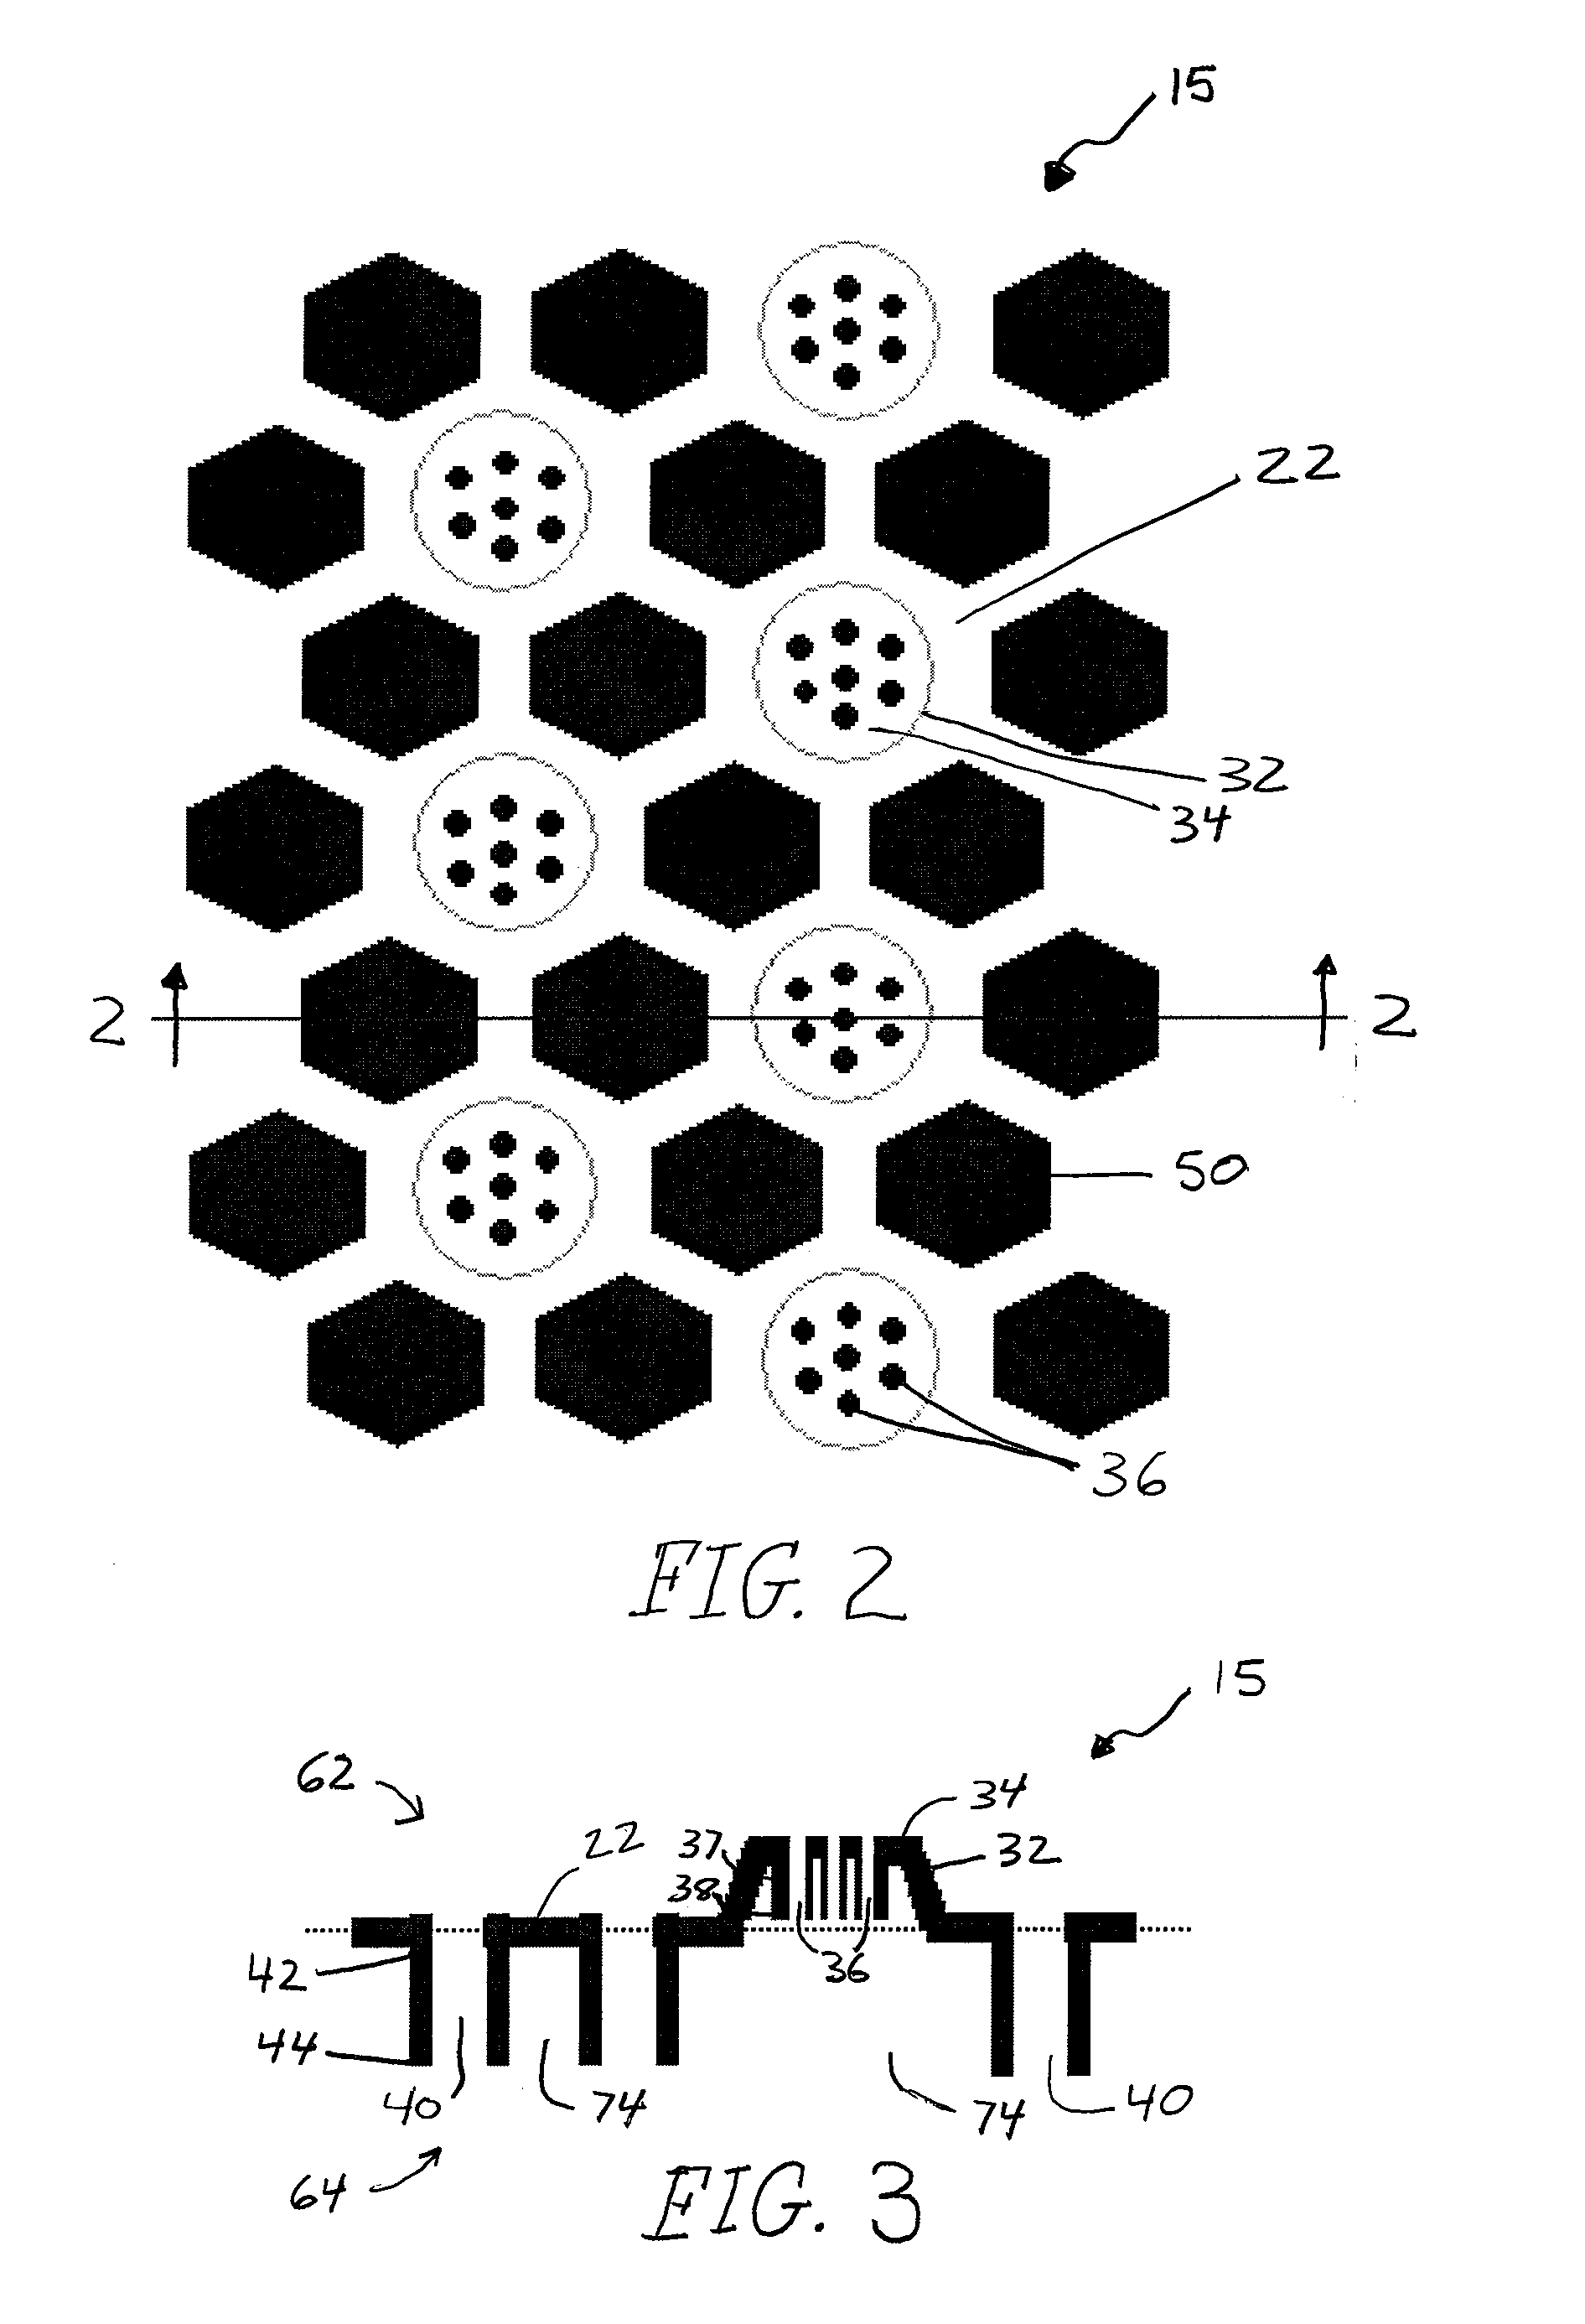 Three-Dimensional Apertured Film for Transmitting Dynamically-Deposited and Statically-Retained Fluids